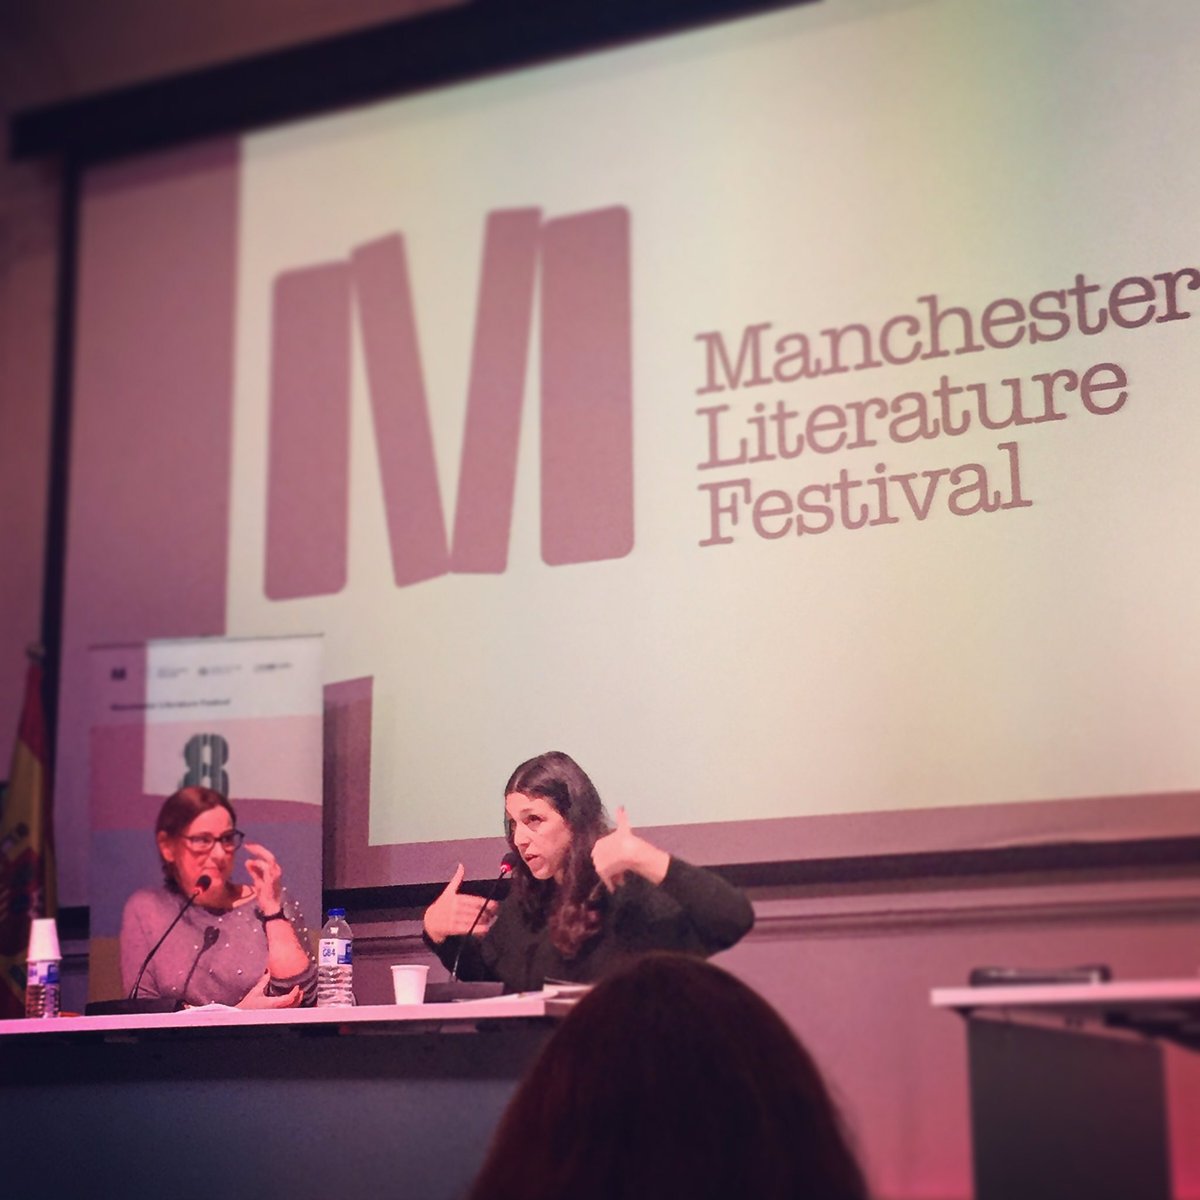 Ariana Harwicz is a delight. So nice to hear someone speaking so passionately and urgently about her work, and Dr Mariana Casale’s translating and discussion is so warm and articulate. Thank you both! #MLF18 #literature #manchester #thecrunch #lovebooks #latinamericanlit